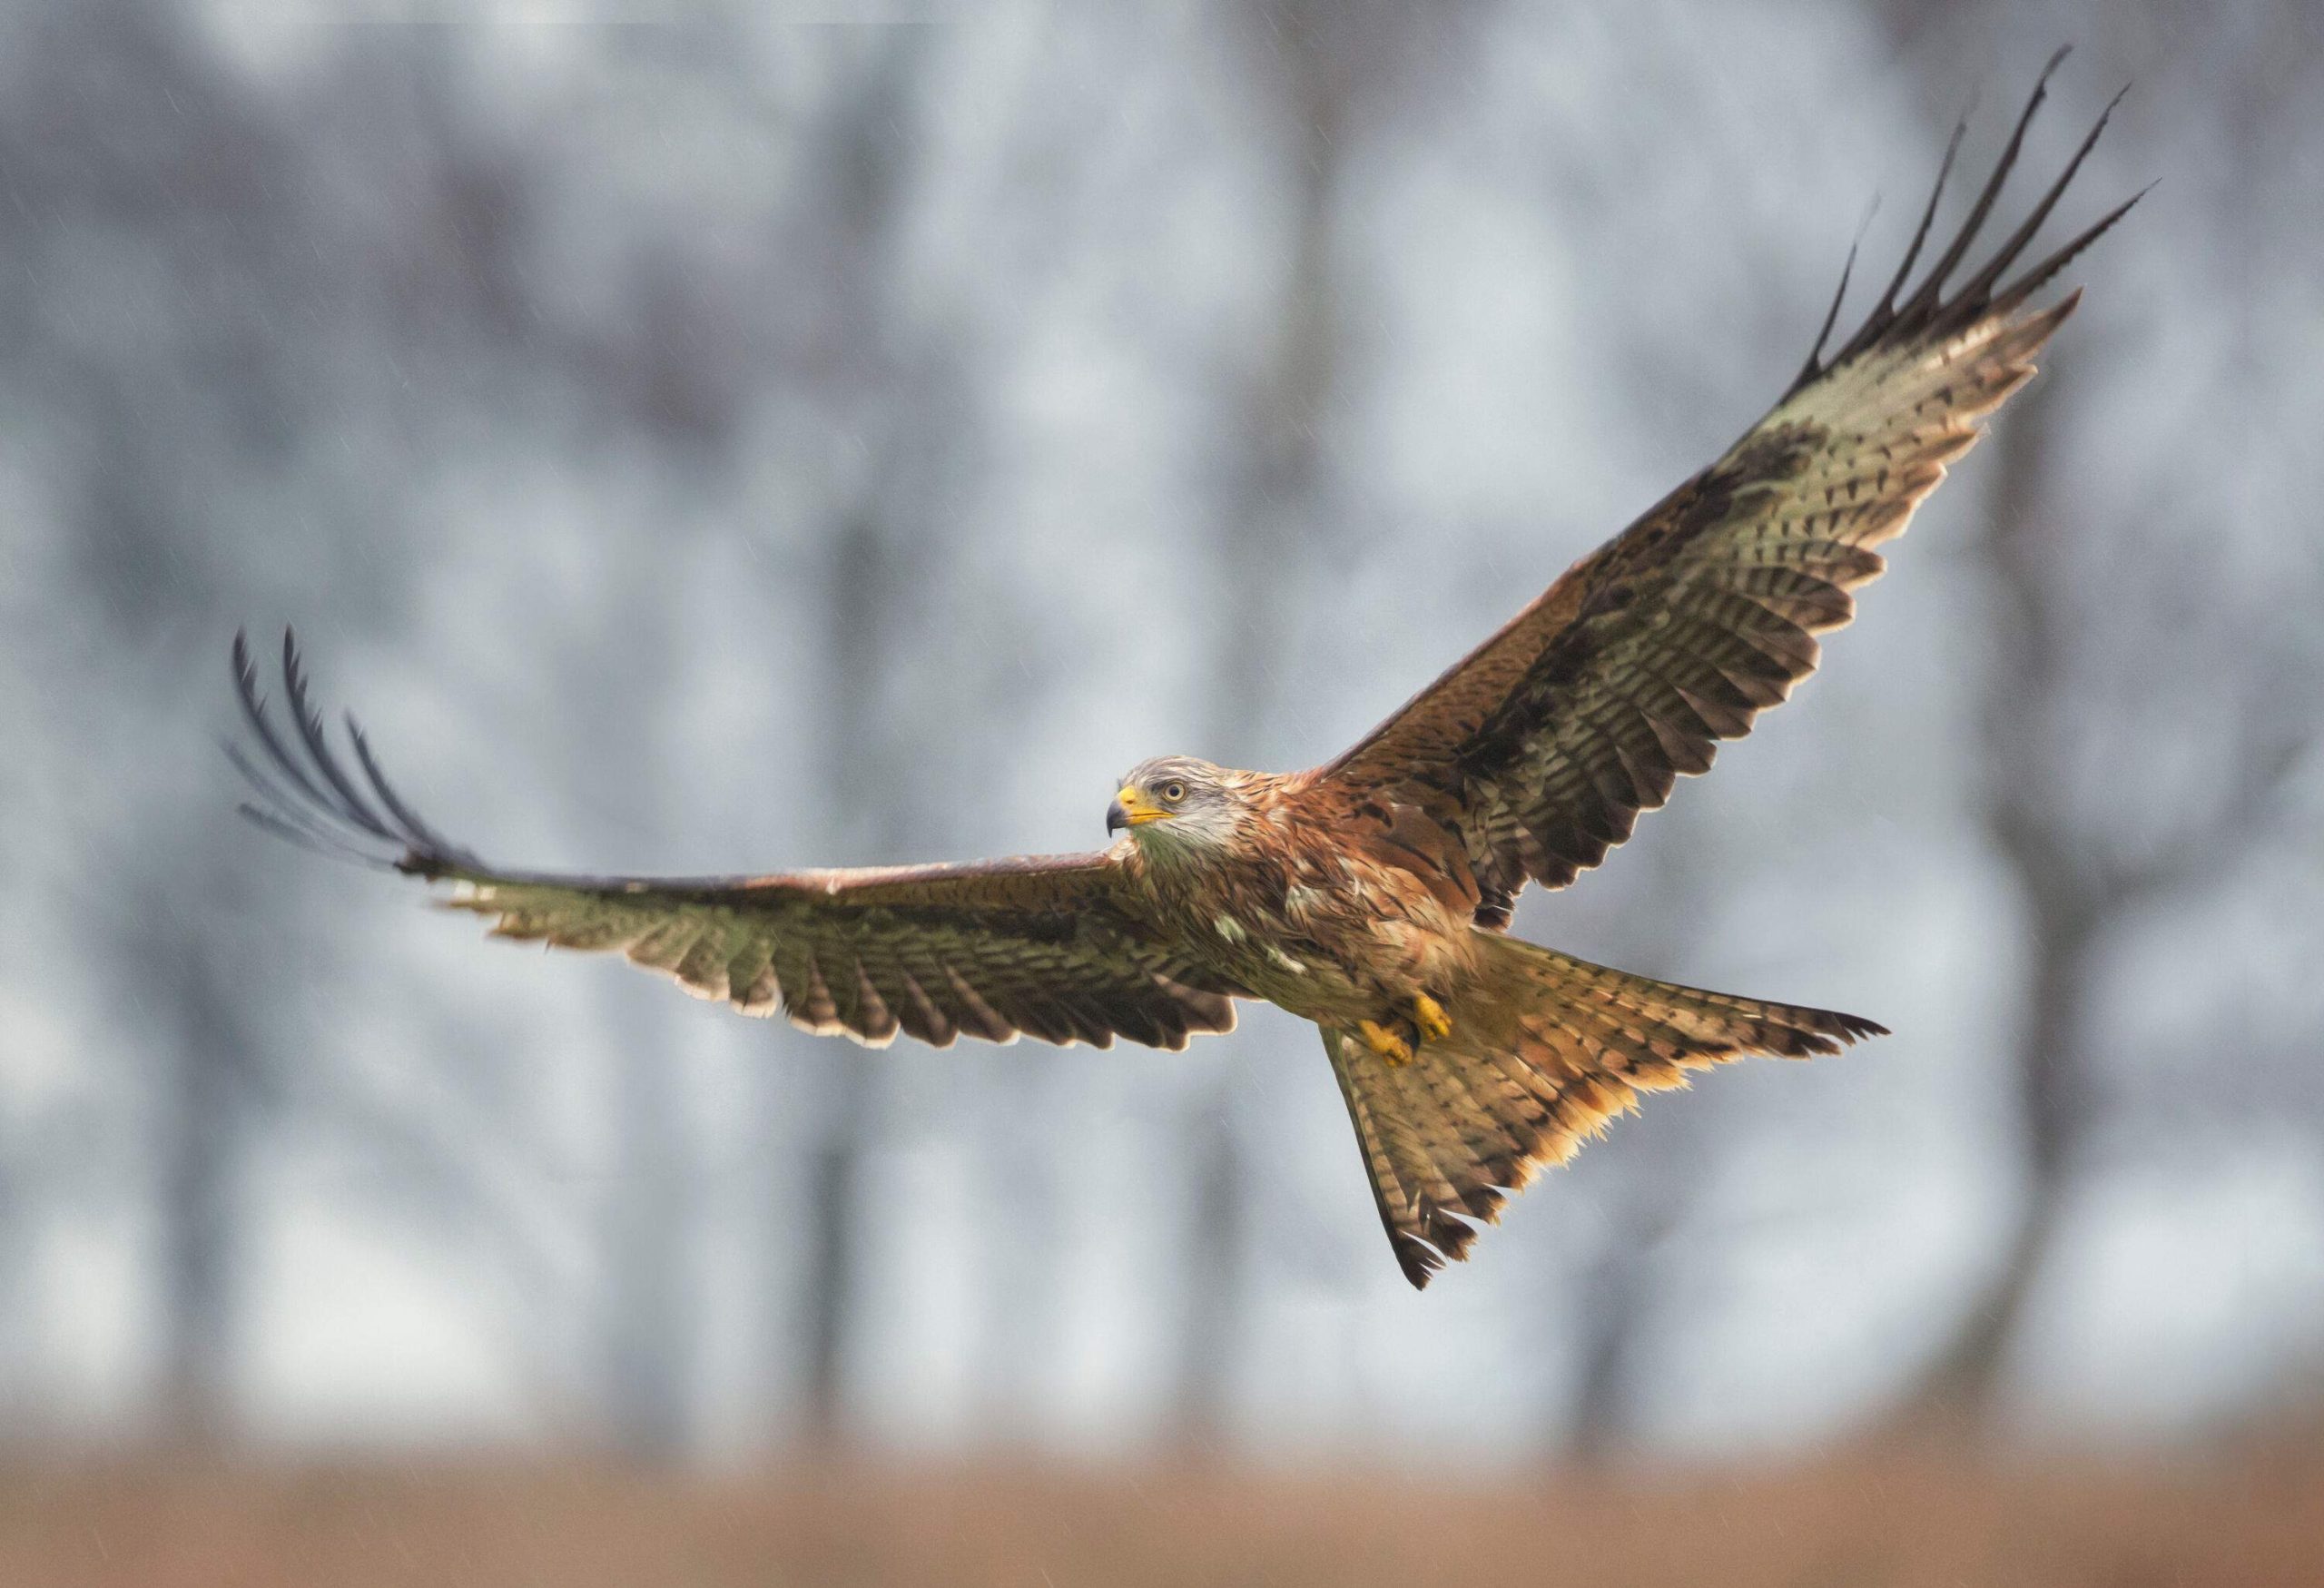 A red kite in flight, gliding through the wind and keeping an eye on its prey.